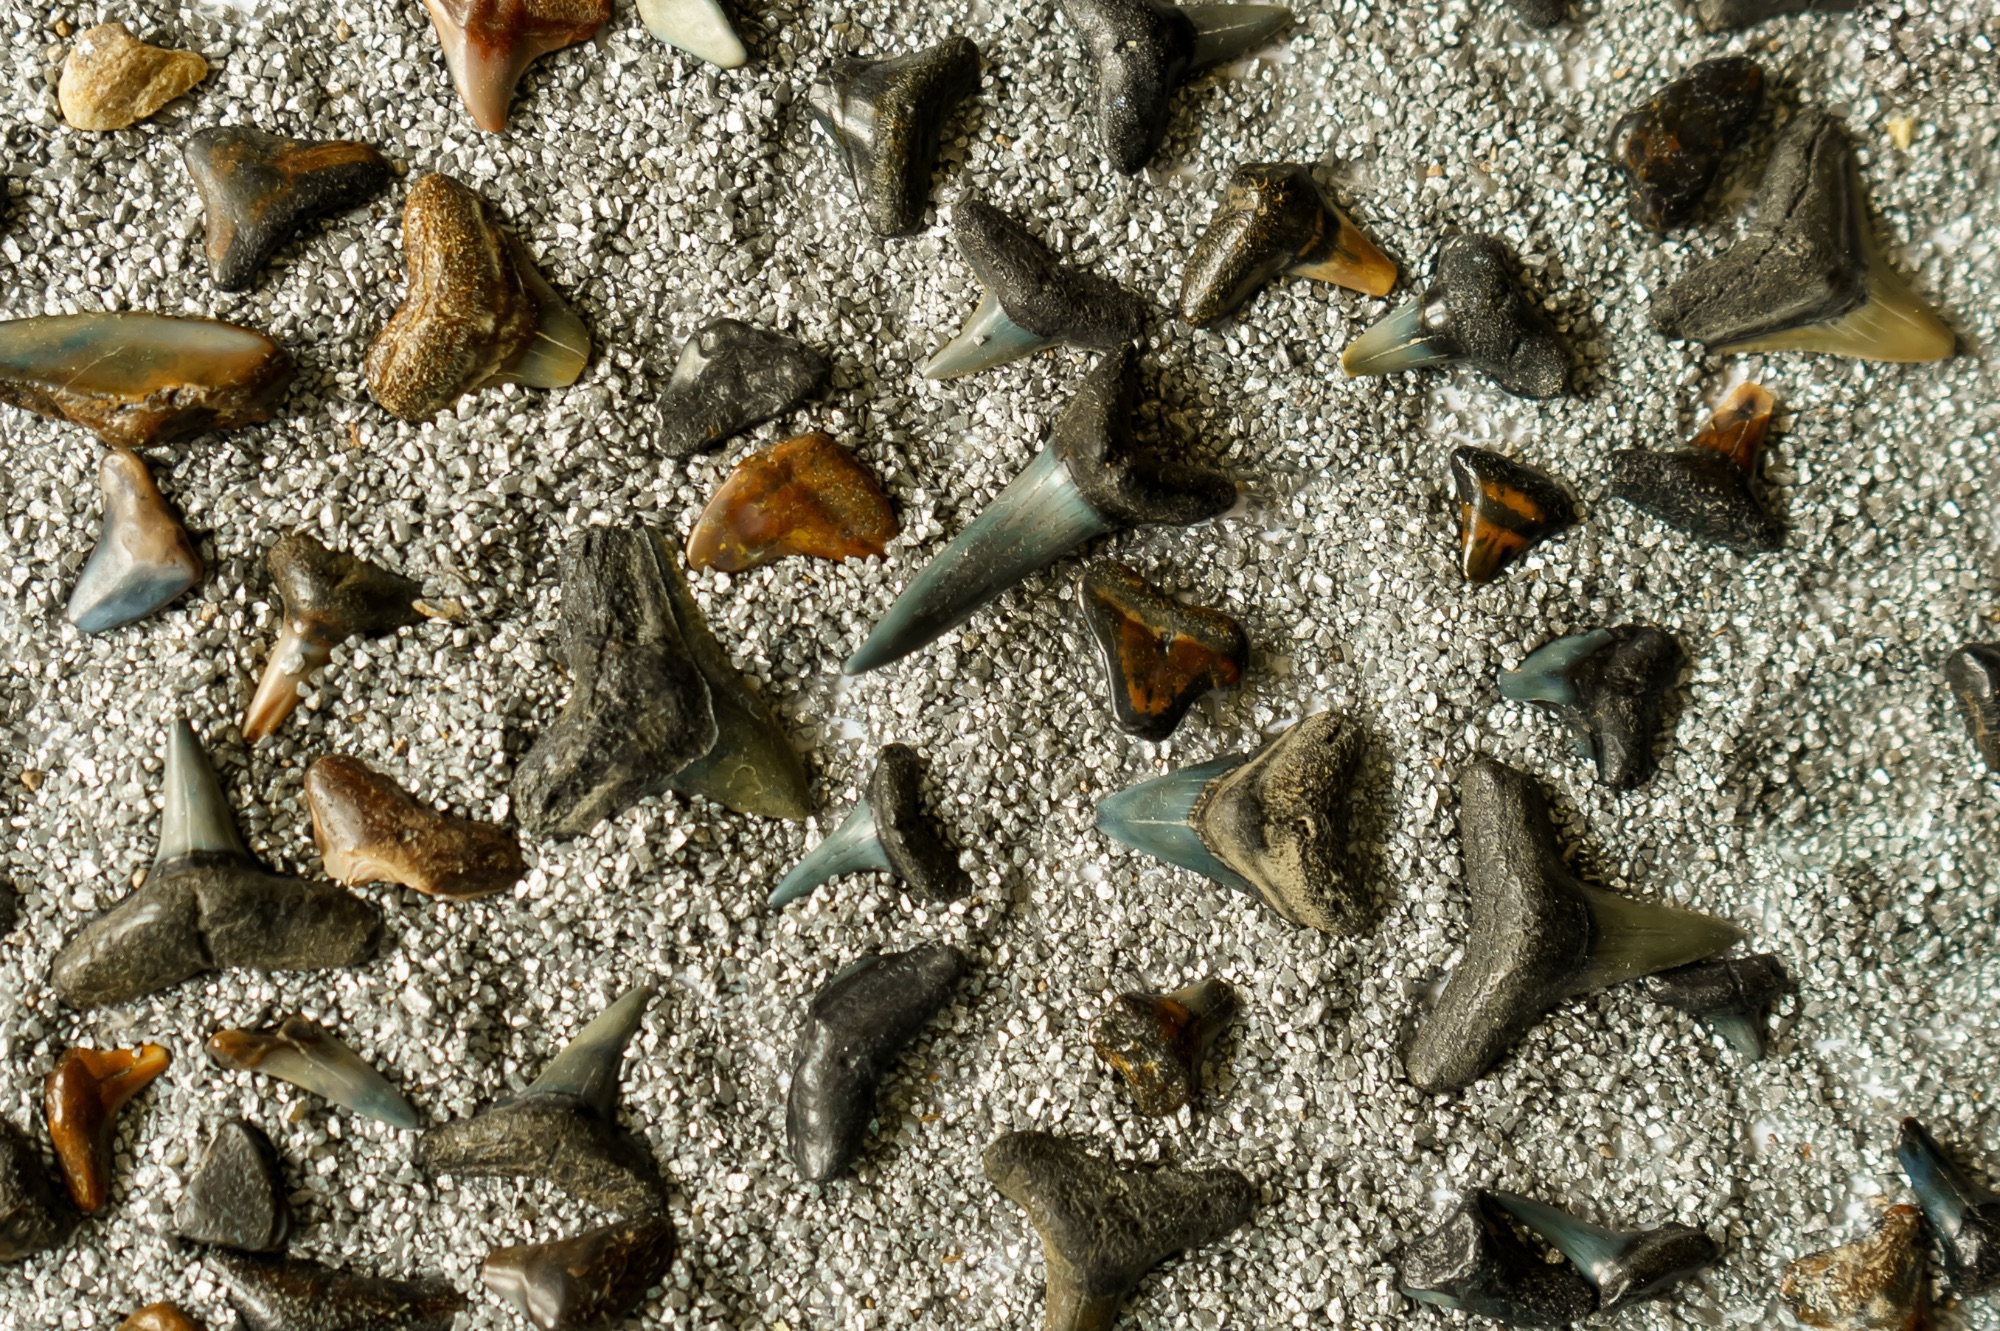 lots of fossilised shark teeth carelessy thrown down to form a pattern on top of dry light coloured sand. The shark teeth are varied in colour feom a burnt orange to a light grey.